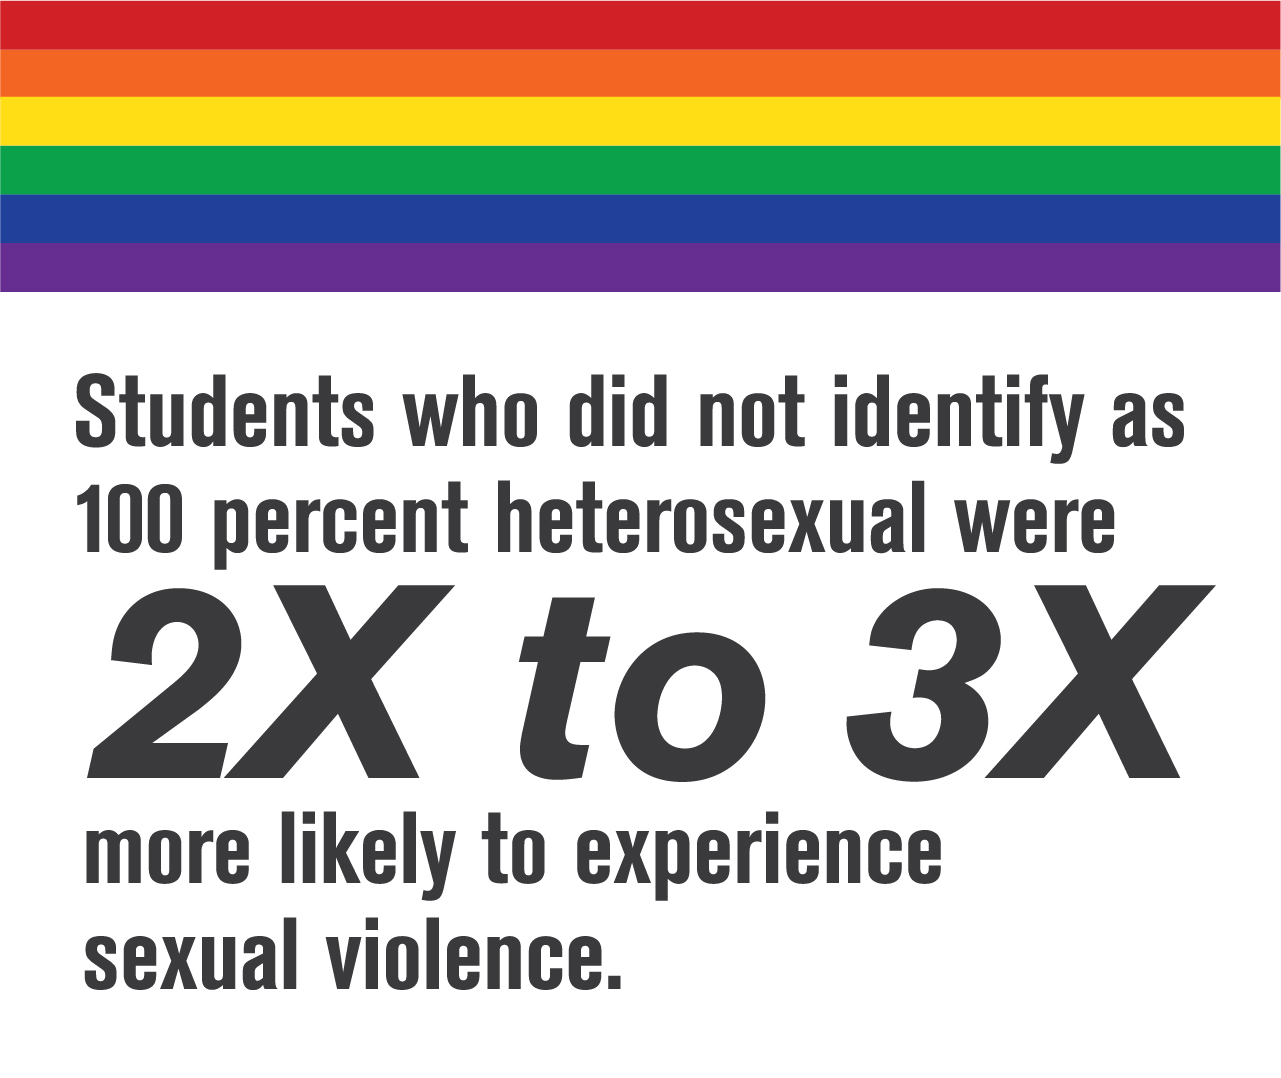 Students who did not identify as 100 percent heterosexual were 2X to 3X more likely to experience sexual violence.